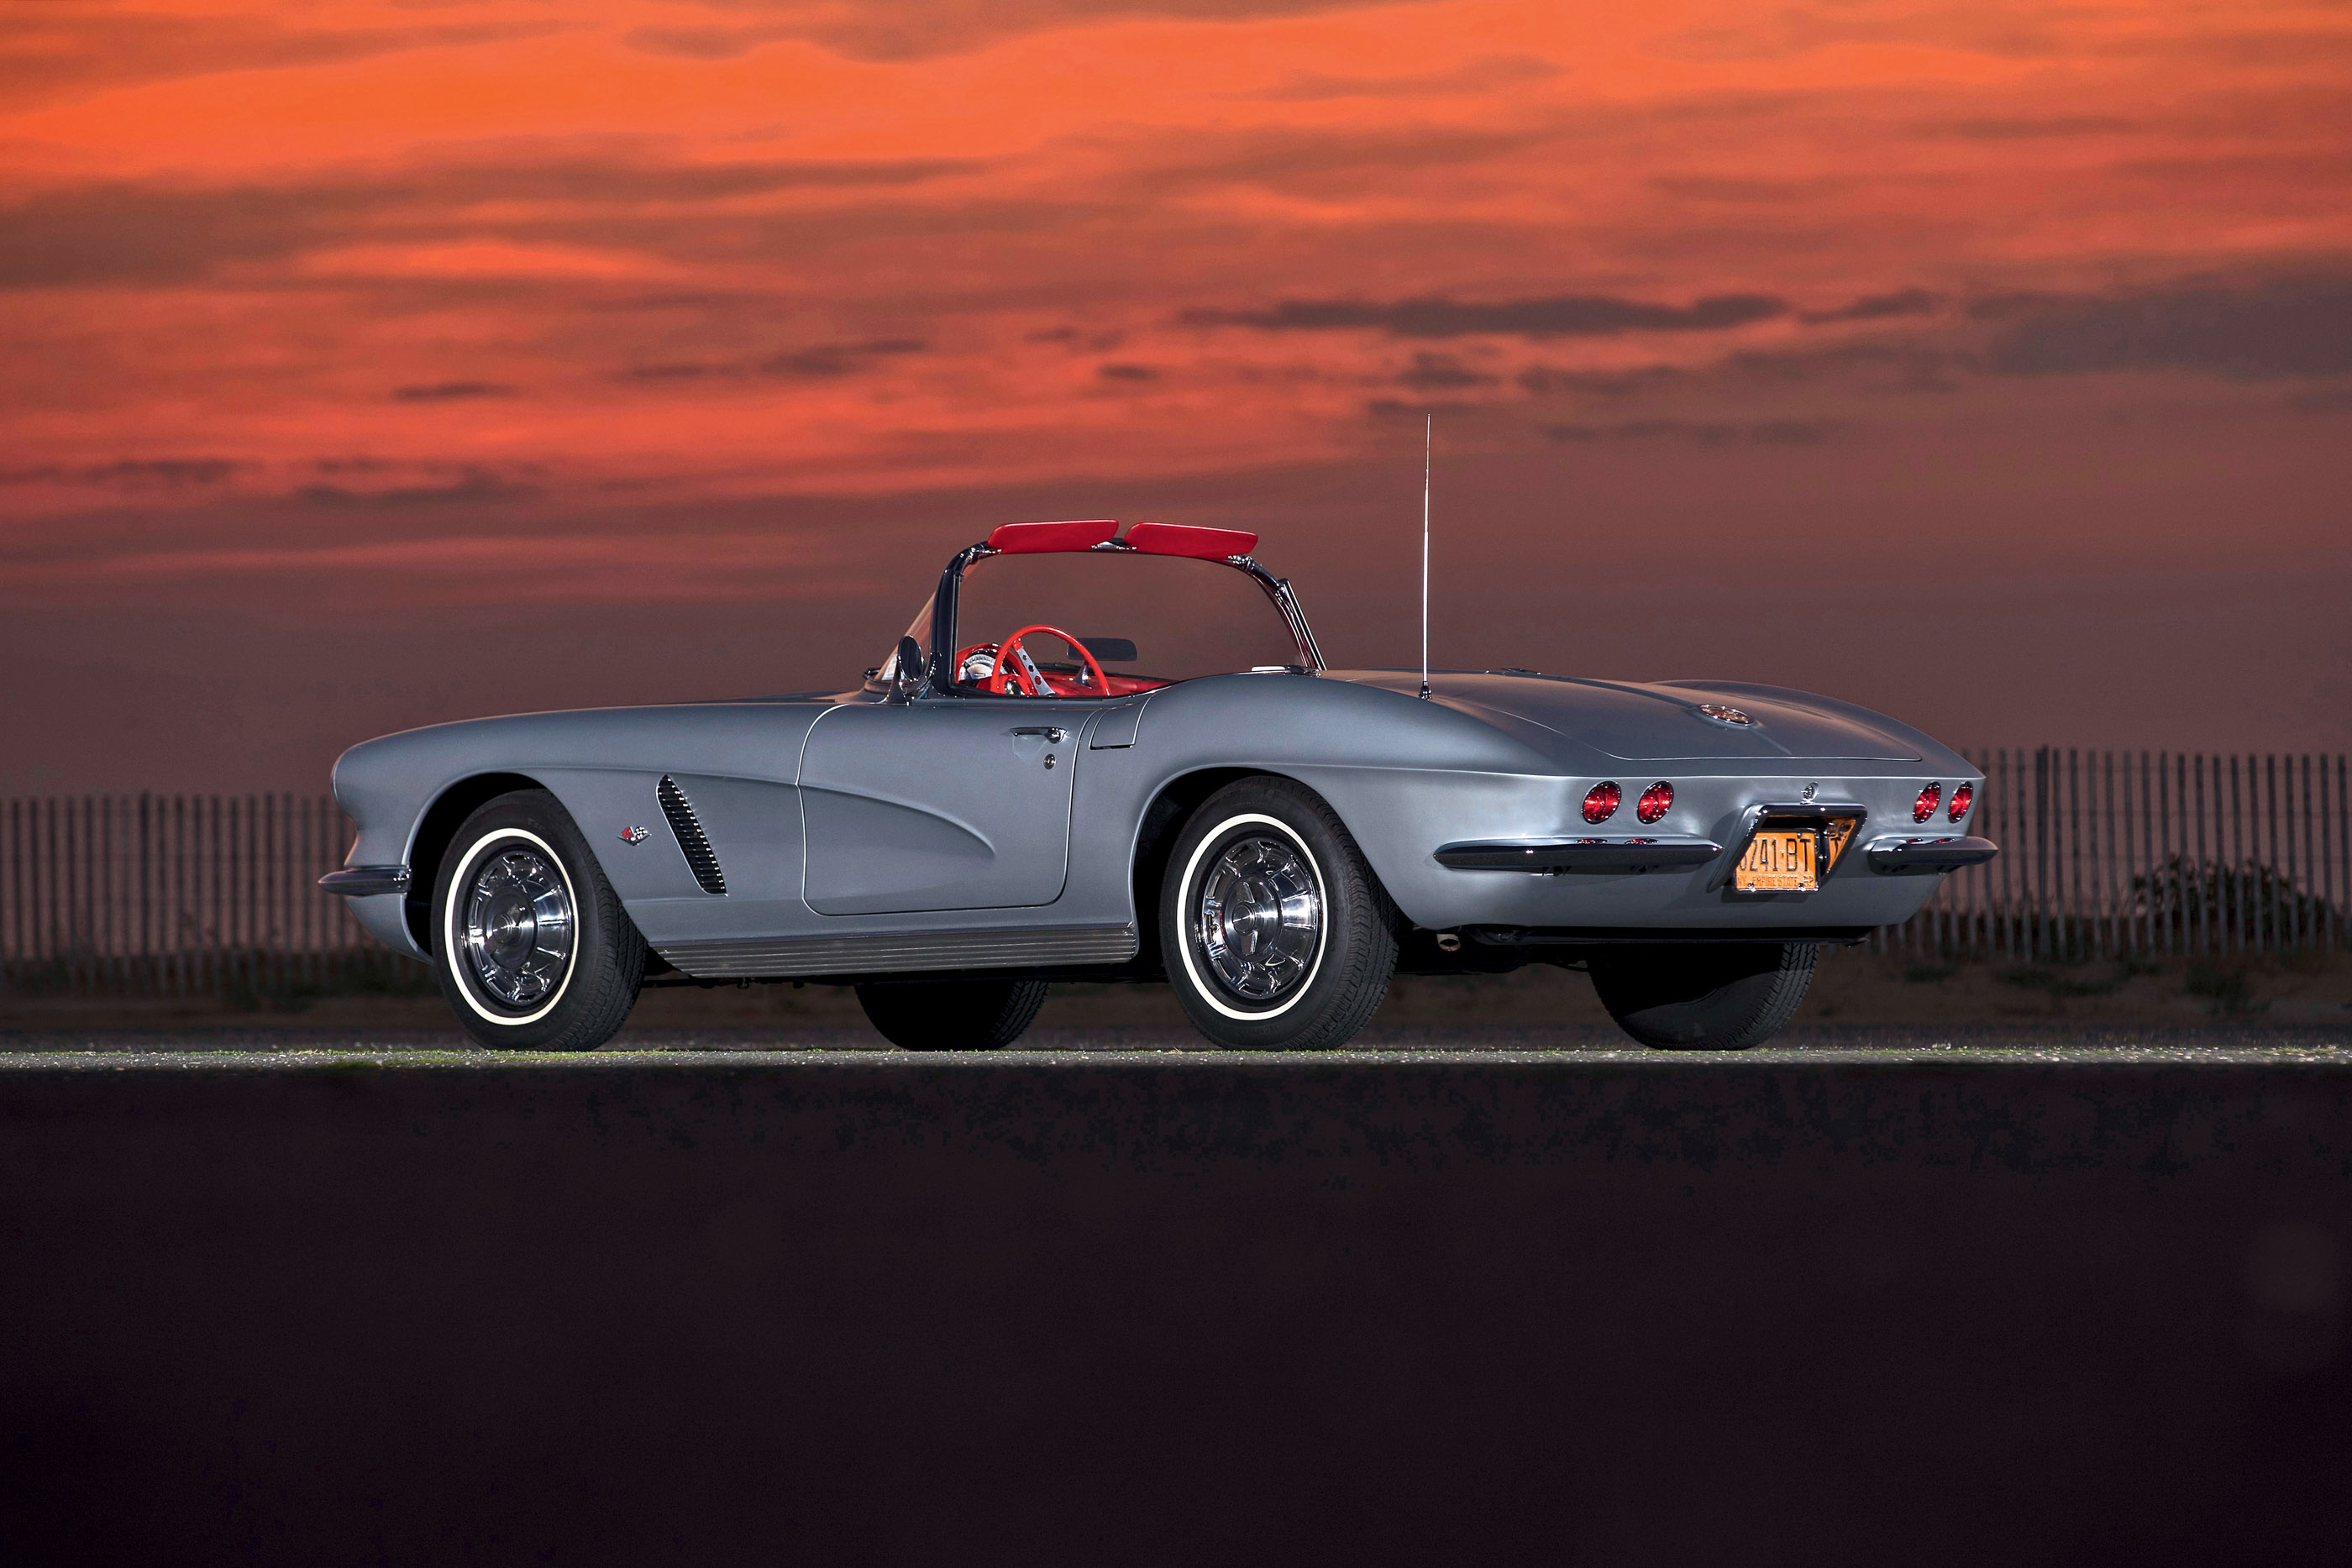 You've Heard Of Pop-Up Headlights, But Check This '60s Corvette